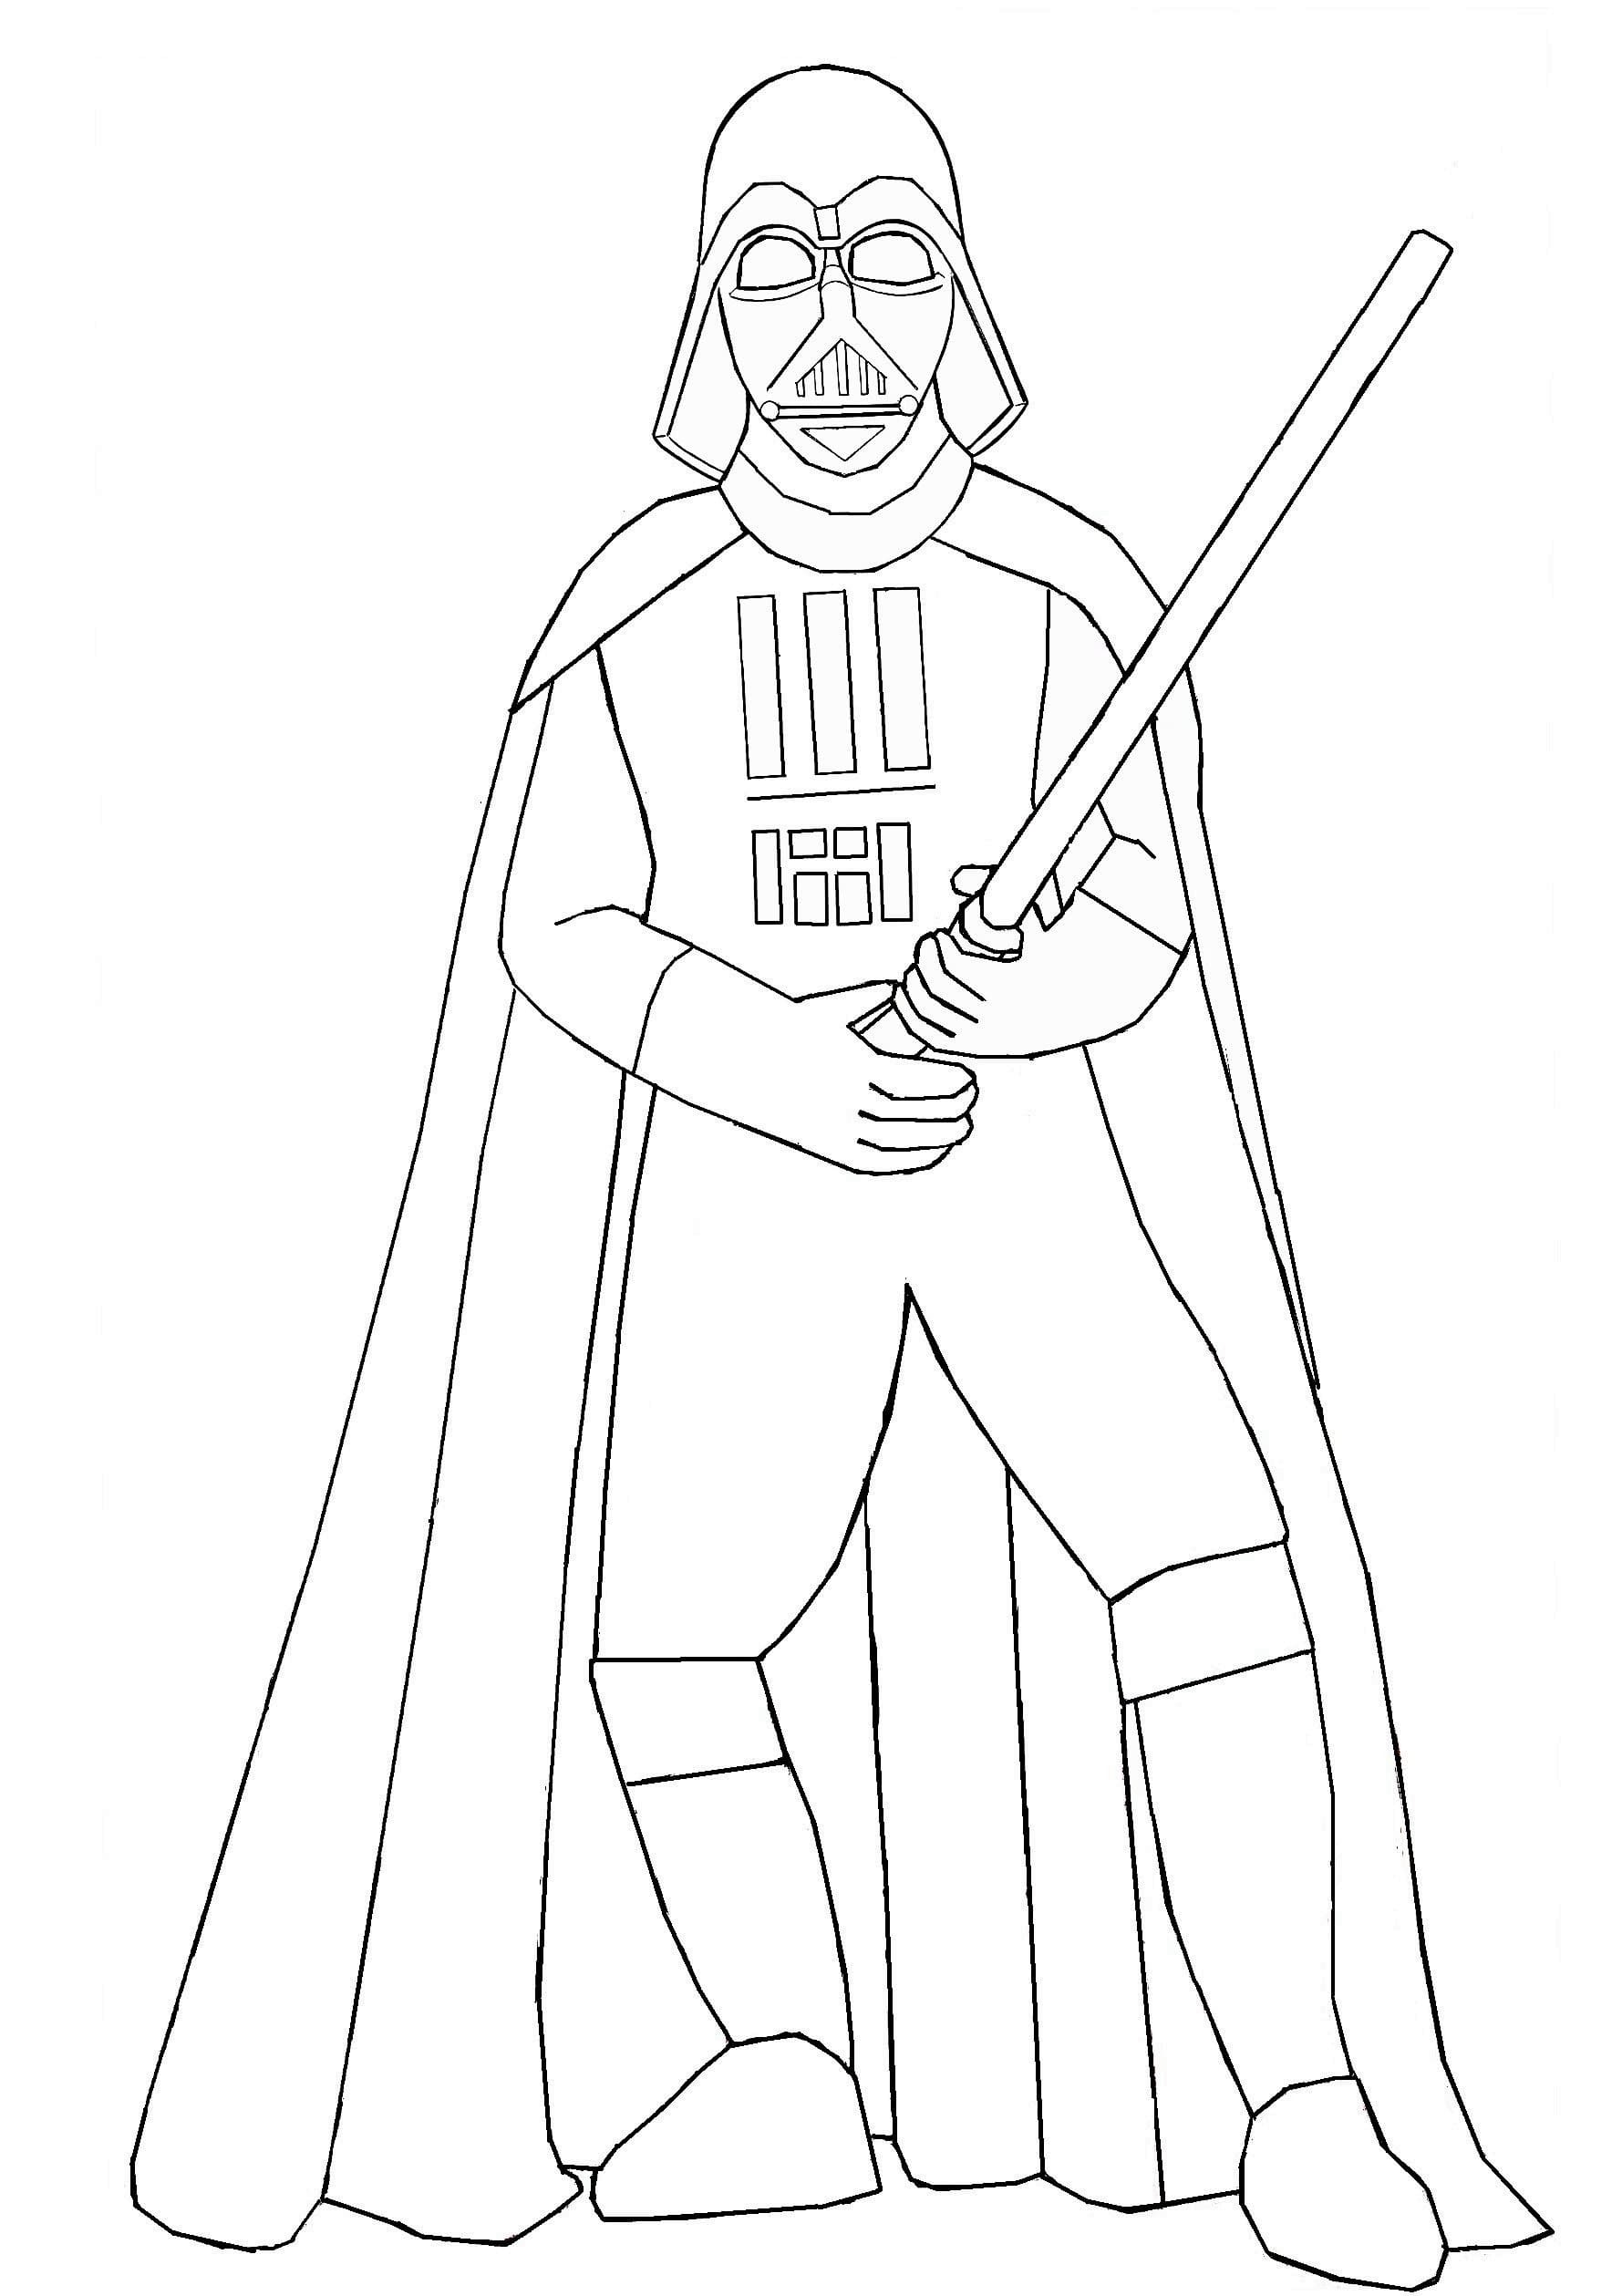 Darth Vader Coloring Pages | 80 Pictures Free Printable